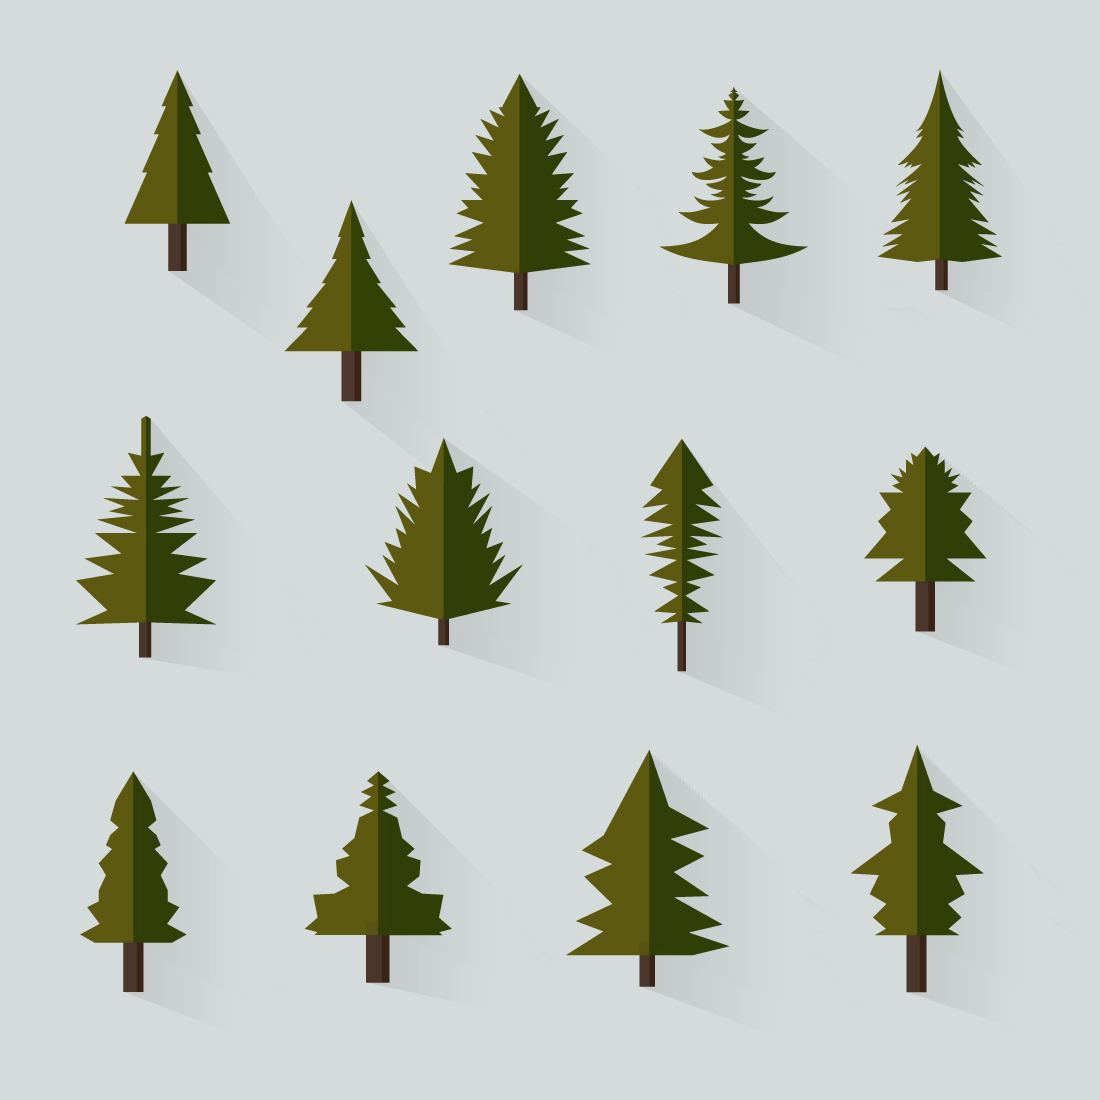 10+ Pine Tree Colorful Vectors & 10+ Pine Tree Silhouettes Vector main cover.